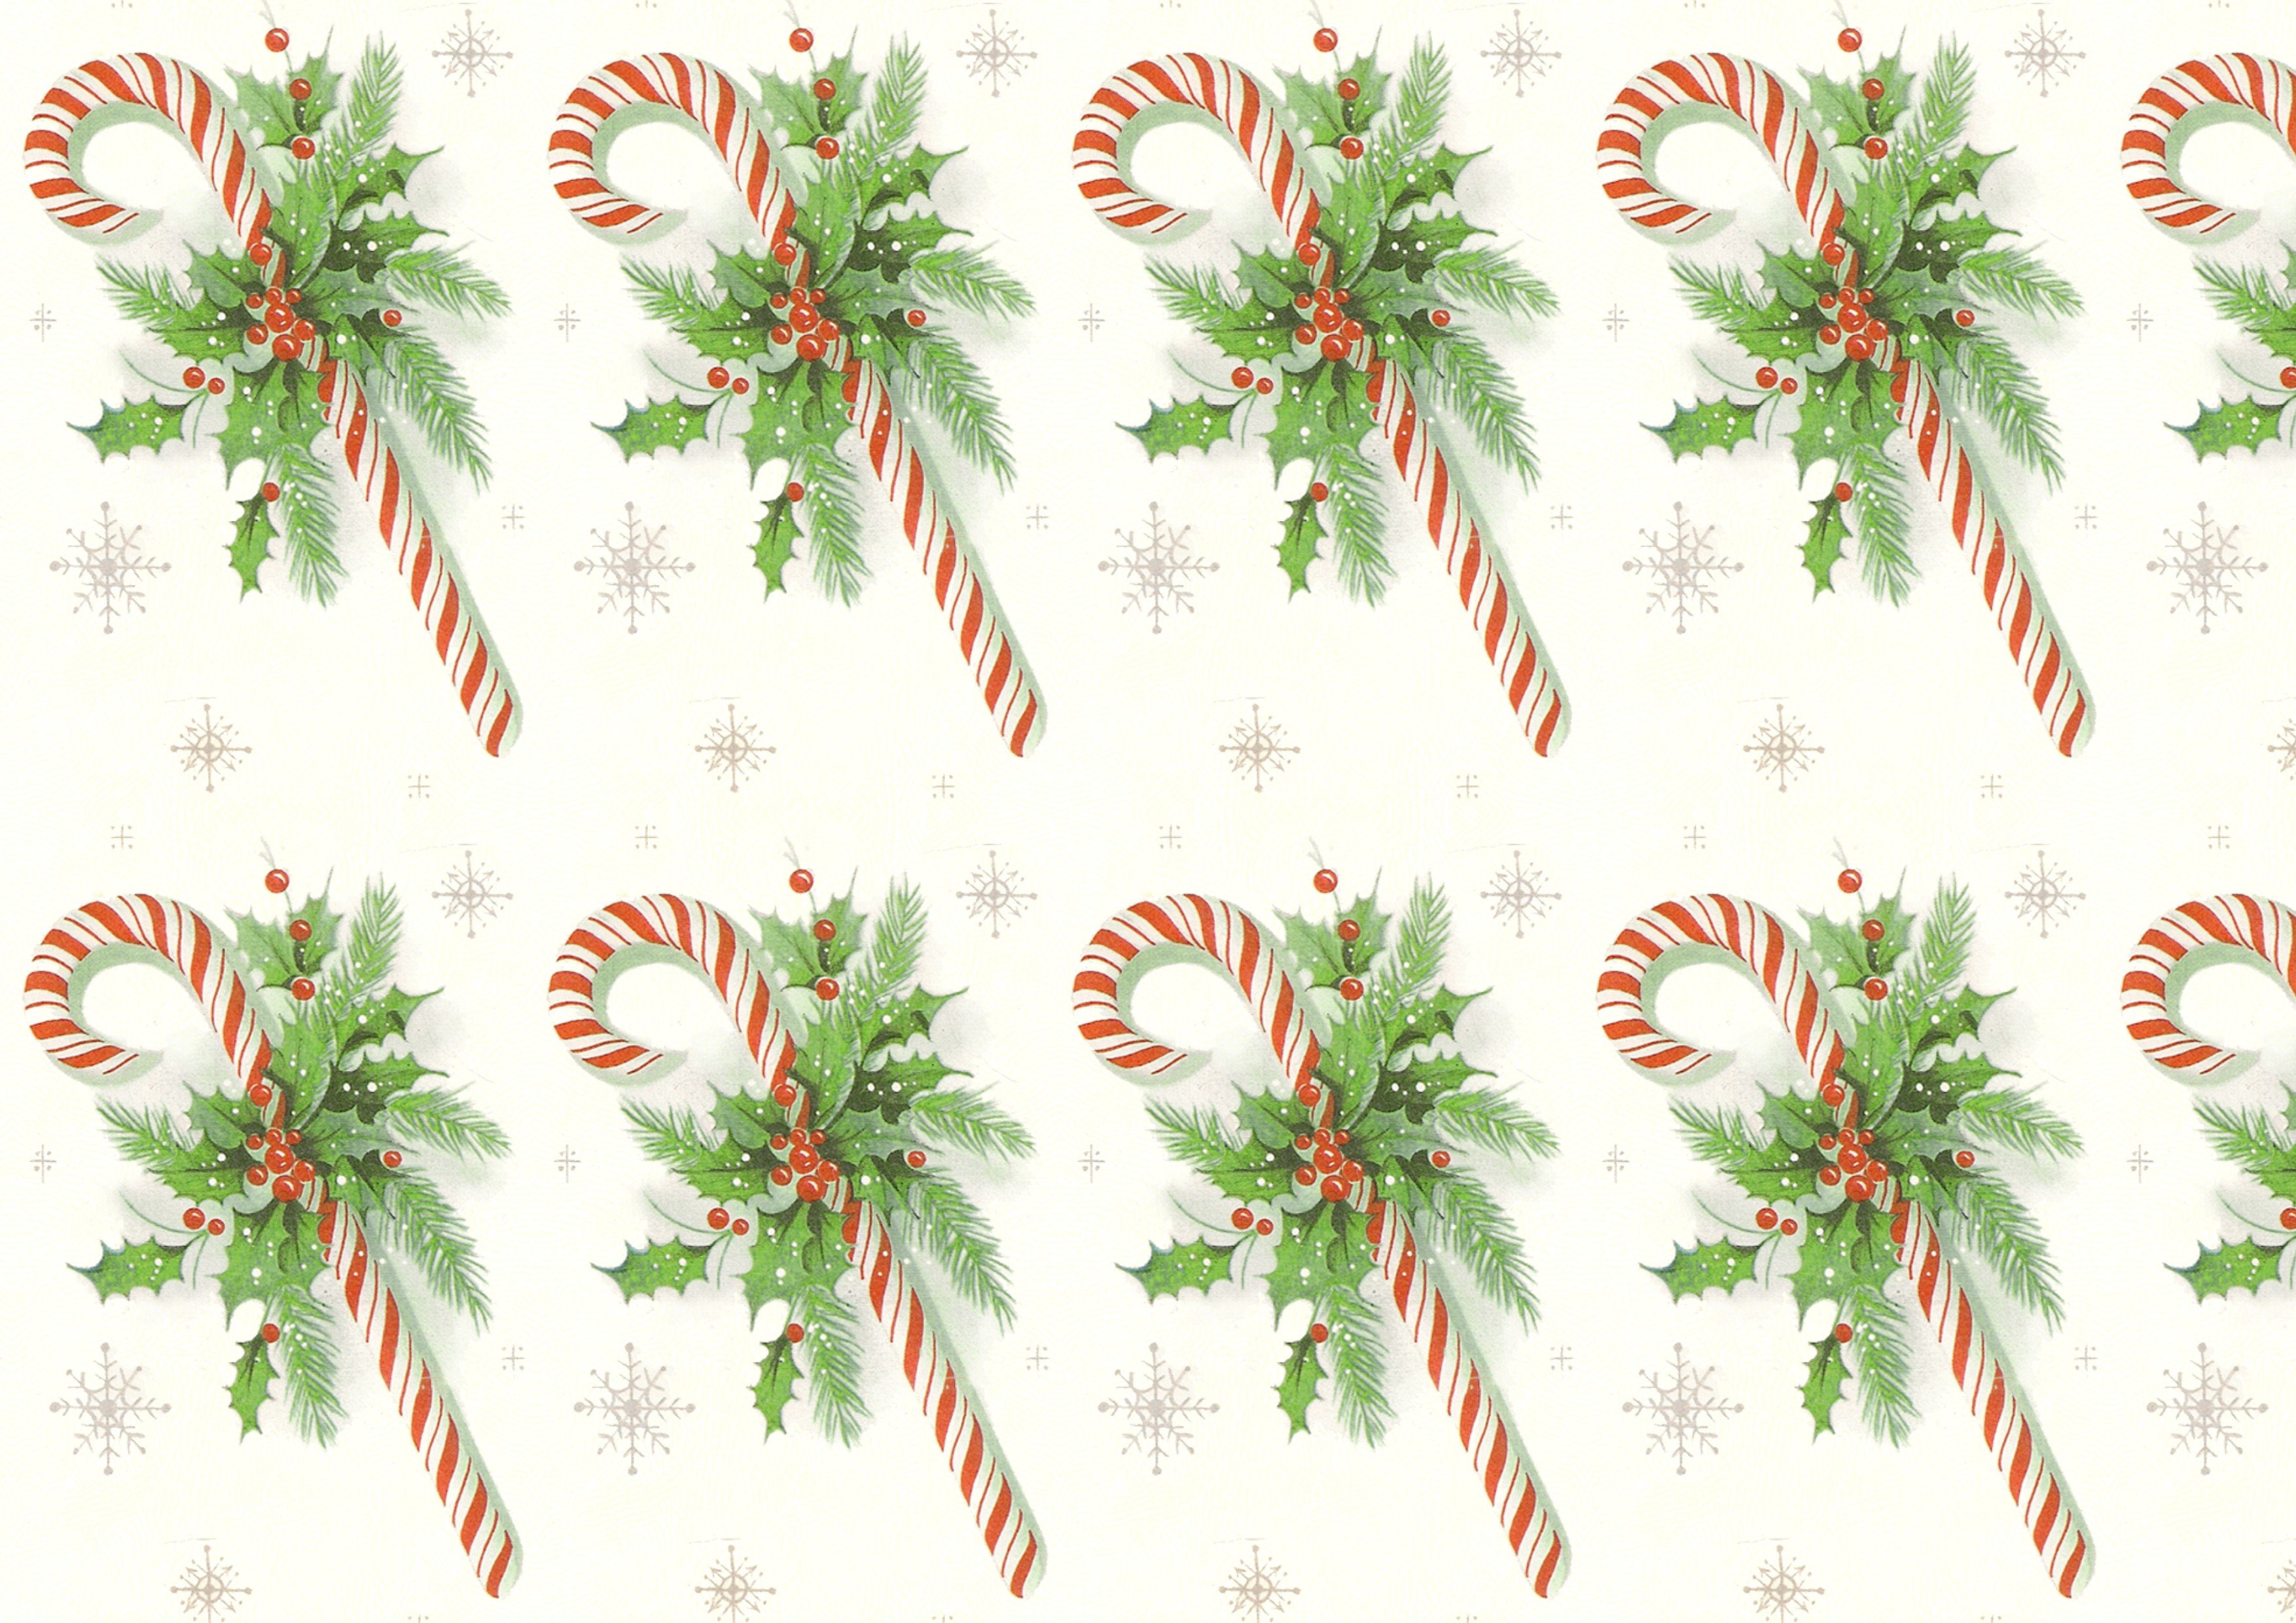 Retro Candy Cane – Seamless tile and printable papers